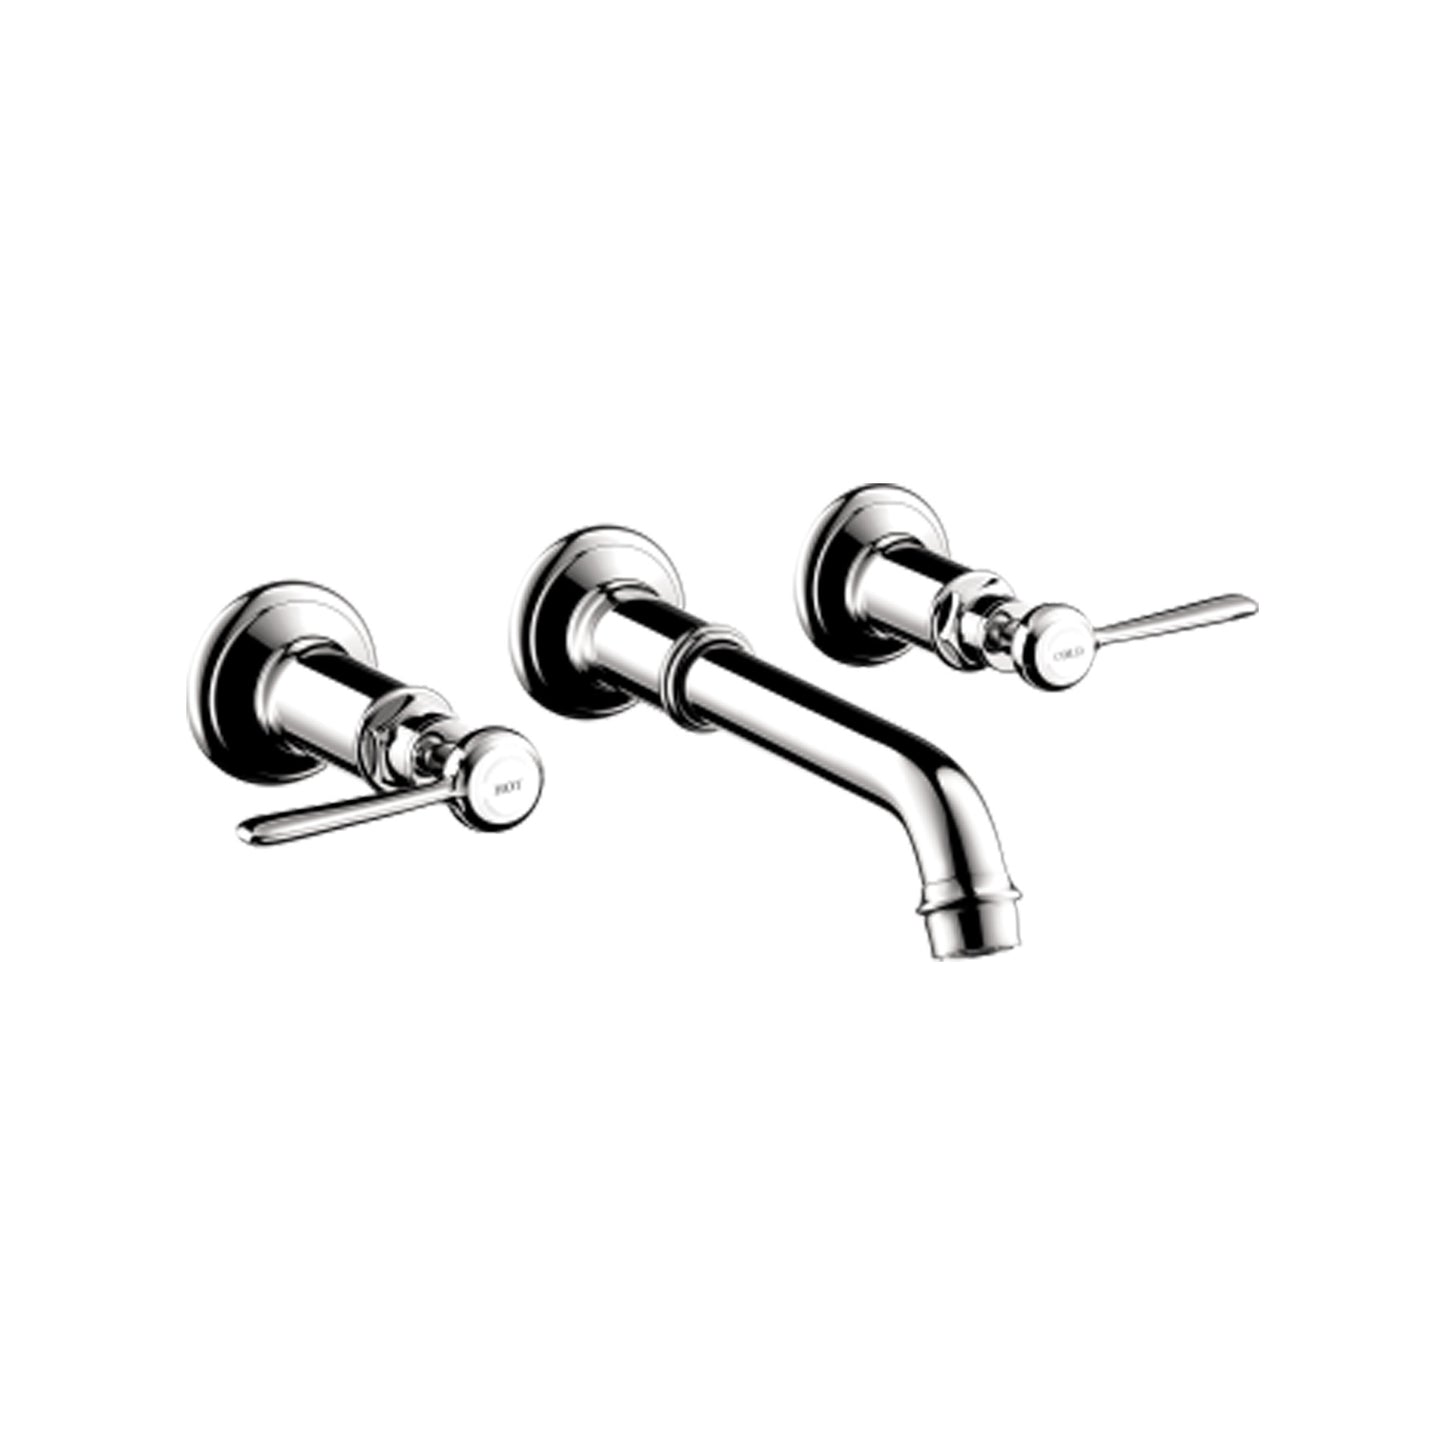 Axor Montreux 3-hole Wall-mounted Basin Mixer, Chrome 16534.000